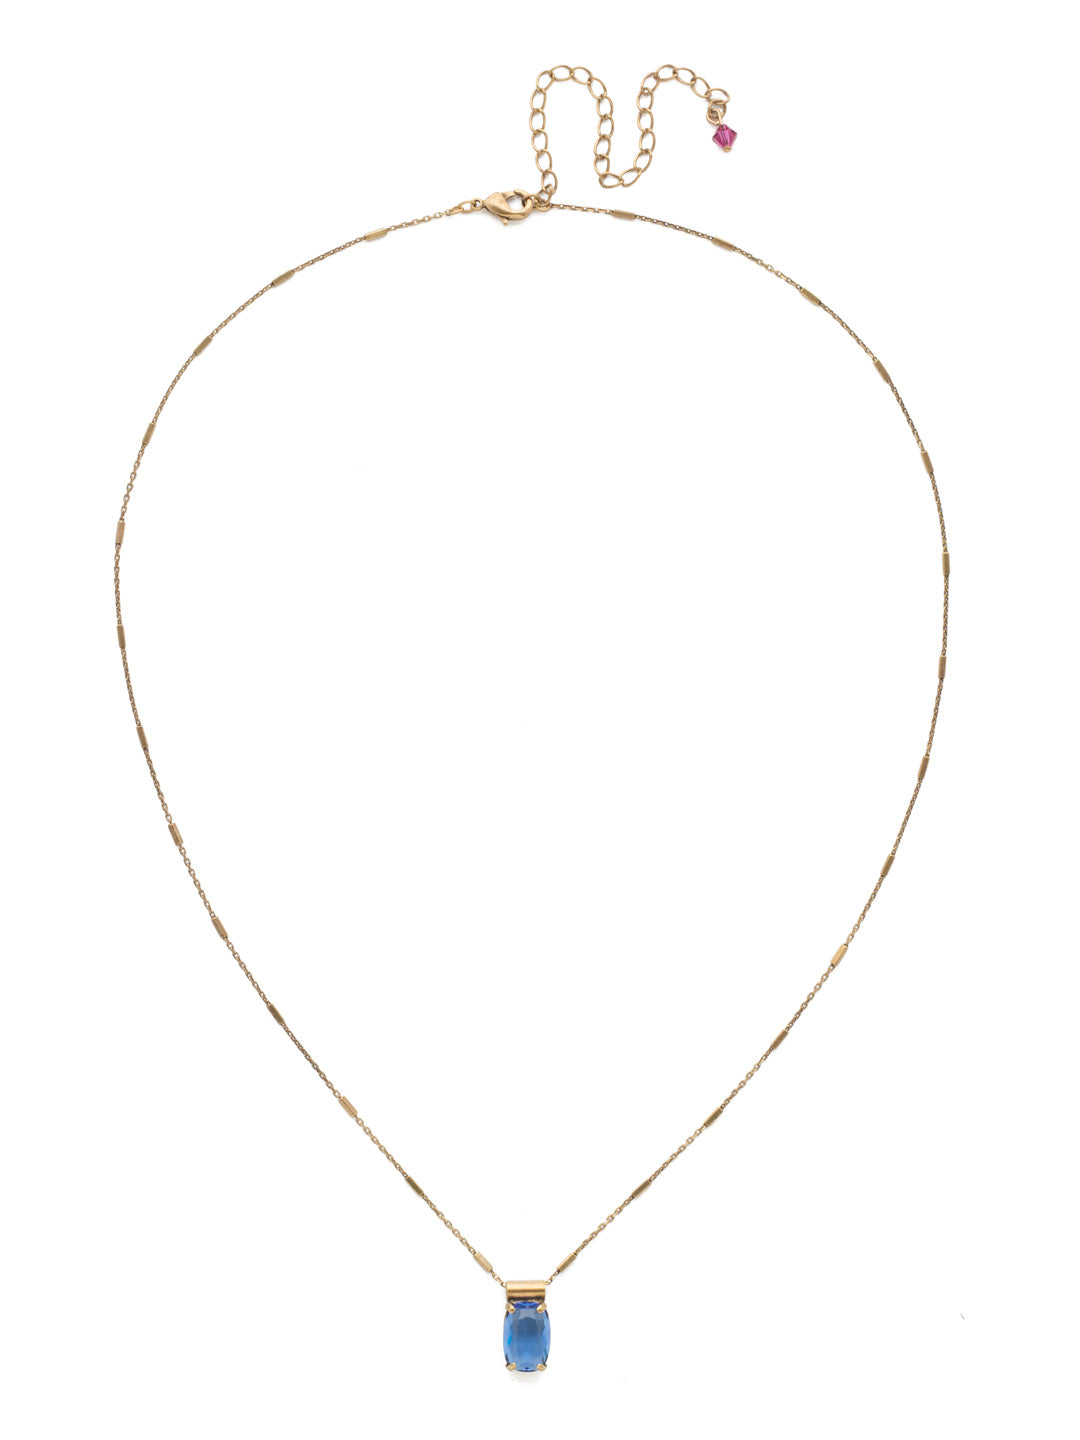 Singular Sensation Pendant - NDN7AGWIL - <p>A single rectangular crystal moves freely on an ornamental chain. A perfect piece for layering! From Sorrelli's Wildflower collection in our Antique Gold-tone finish.</p>